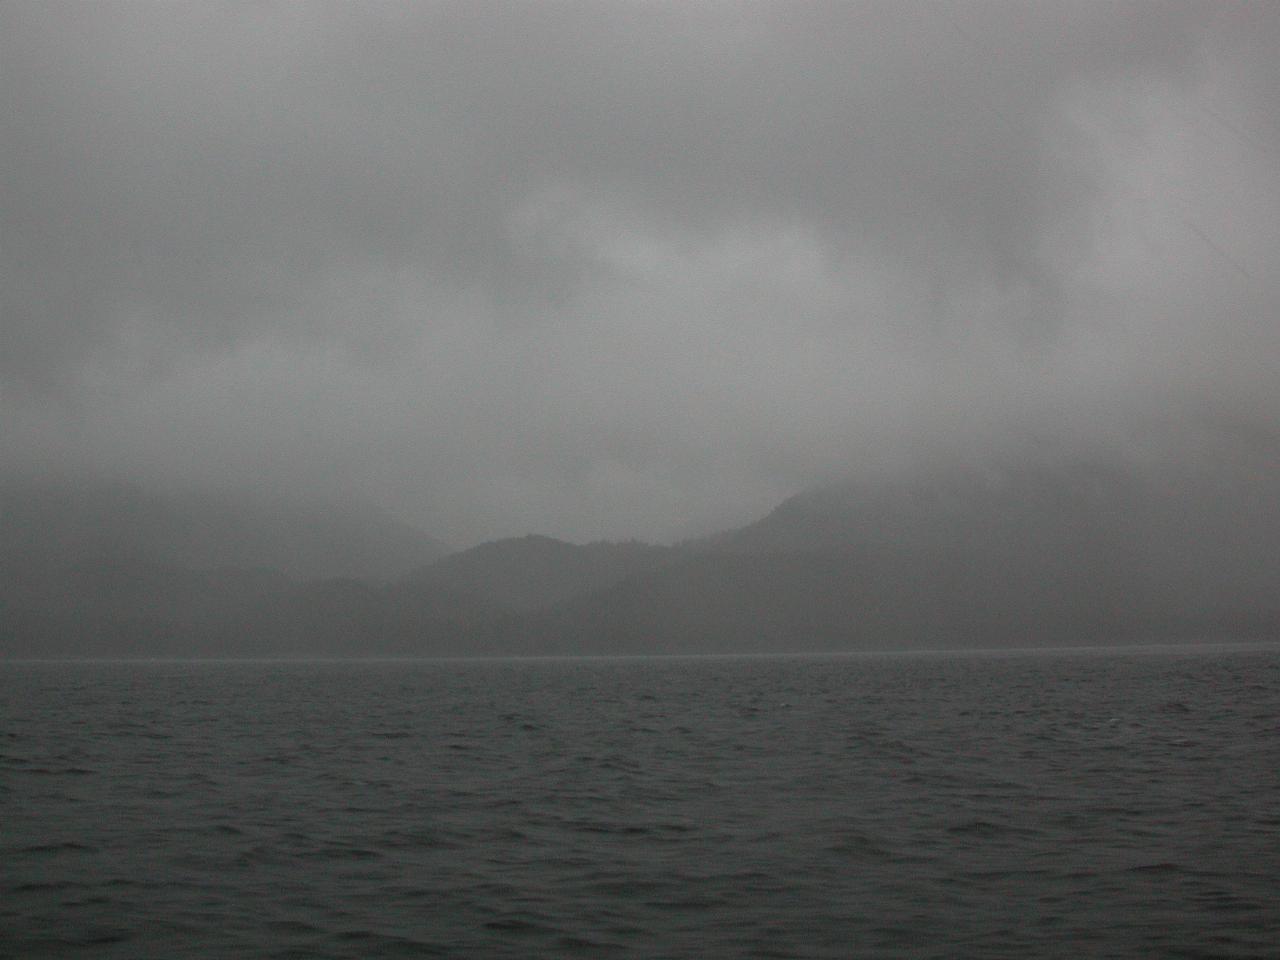 Stormy weather, a little north of Ketchikan in Clarence Channel